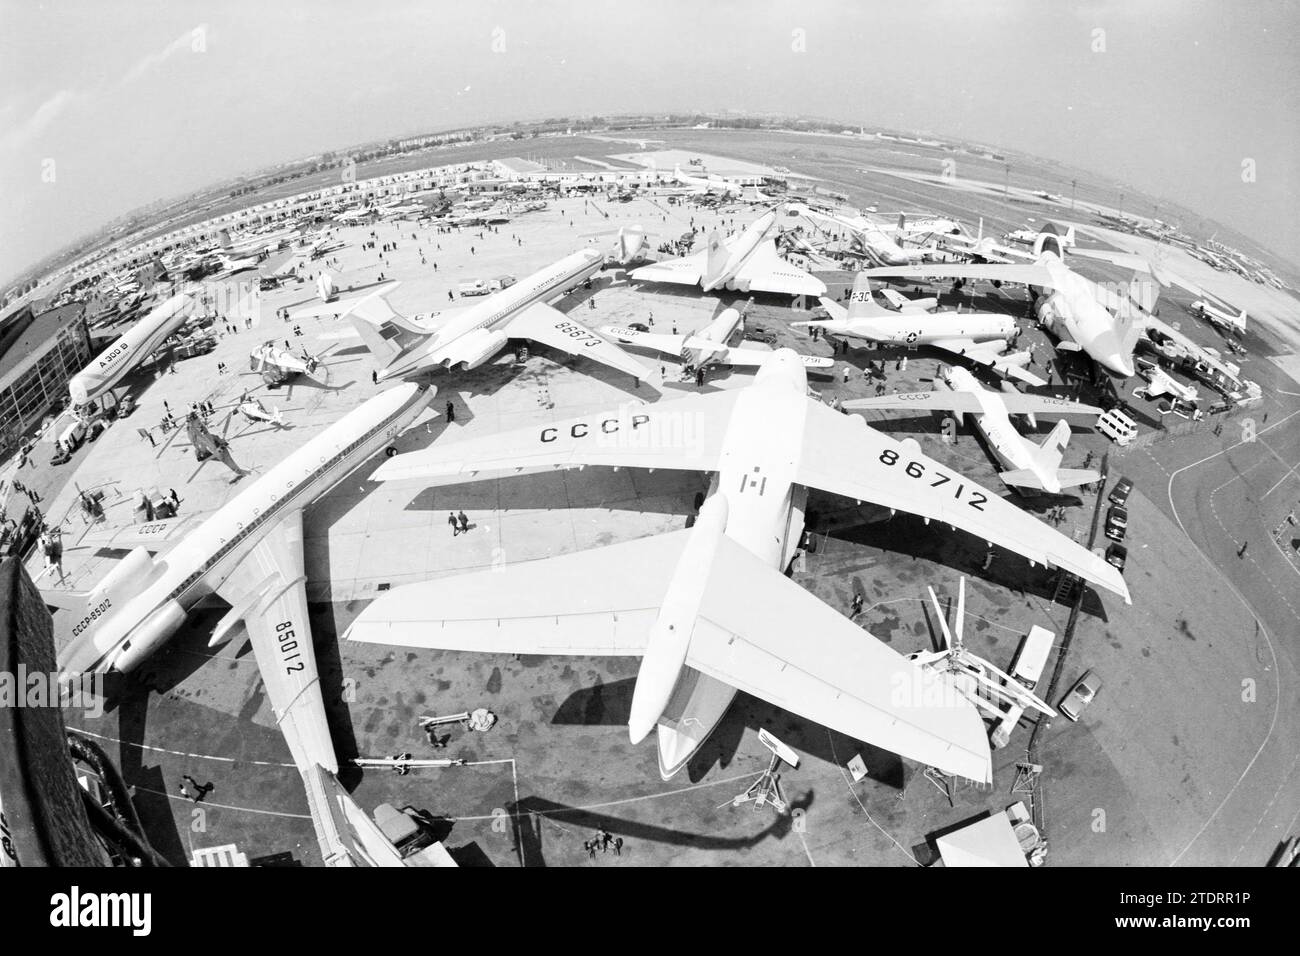 Aviation exhibition Paris, Exhibitions, 27-05-1971, Whizgle News from the Past, Tailored for the Future. Explore historical narratives, Dutch The Netherlands agency image with a modern perspective, bridging the gap between yesterday's events and tomorrow's insights. A timeless journey shaping the stories that shape our future Stock Photo